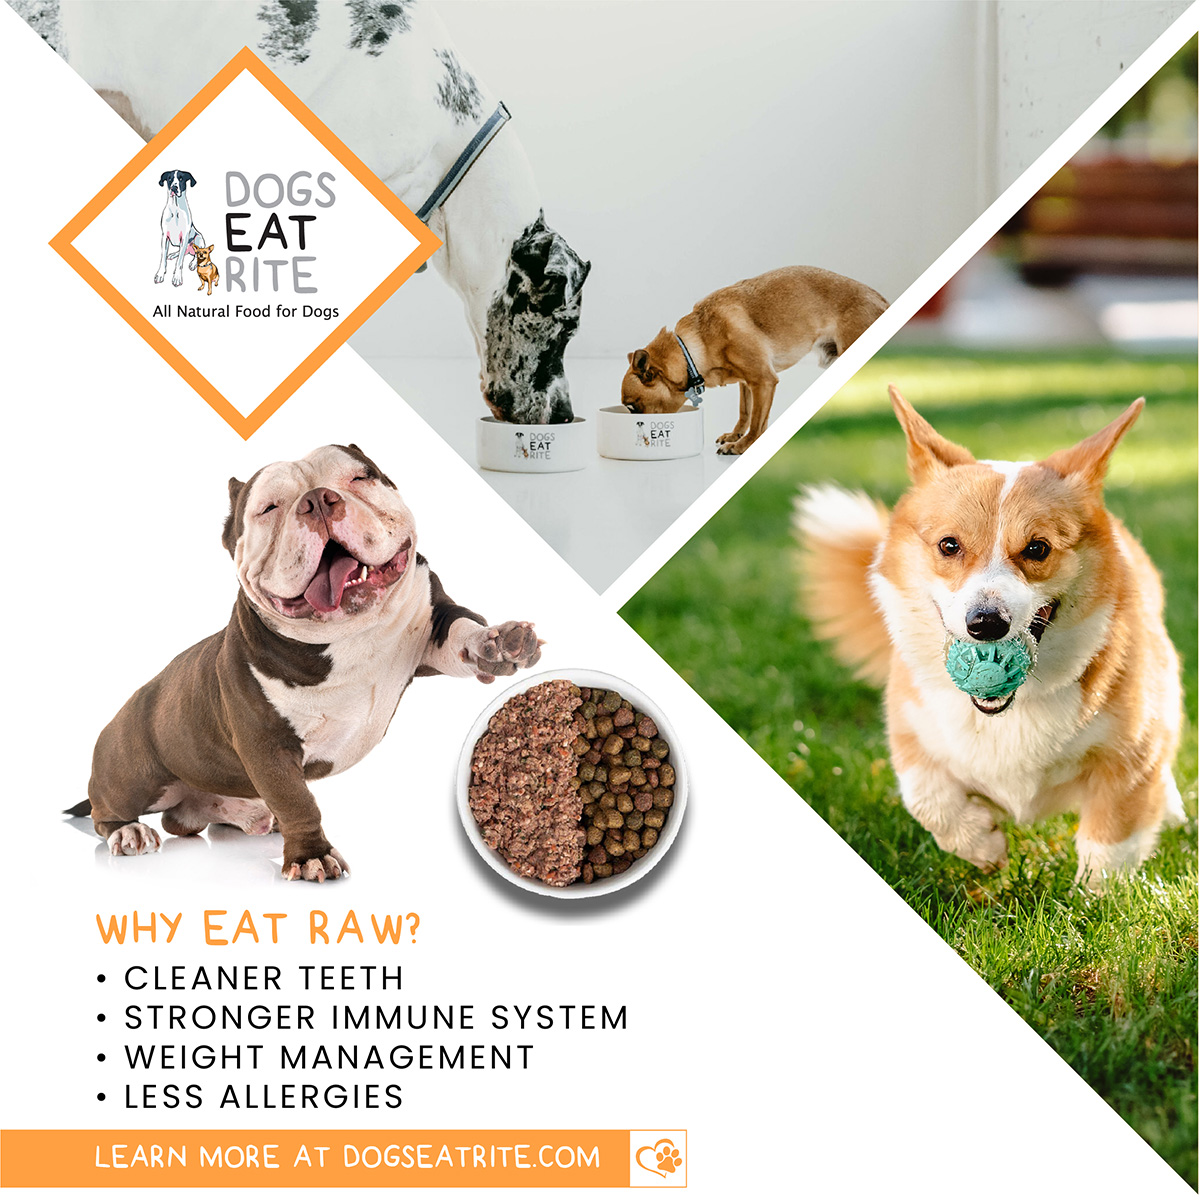 At Dogs Eat Rite we create all natural raw dog food meals with optimal health benefits so that your best friend lives a longer, healthier, happier life.